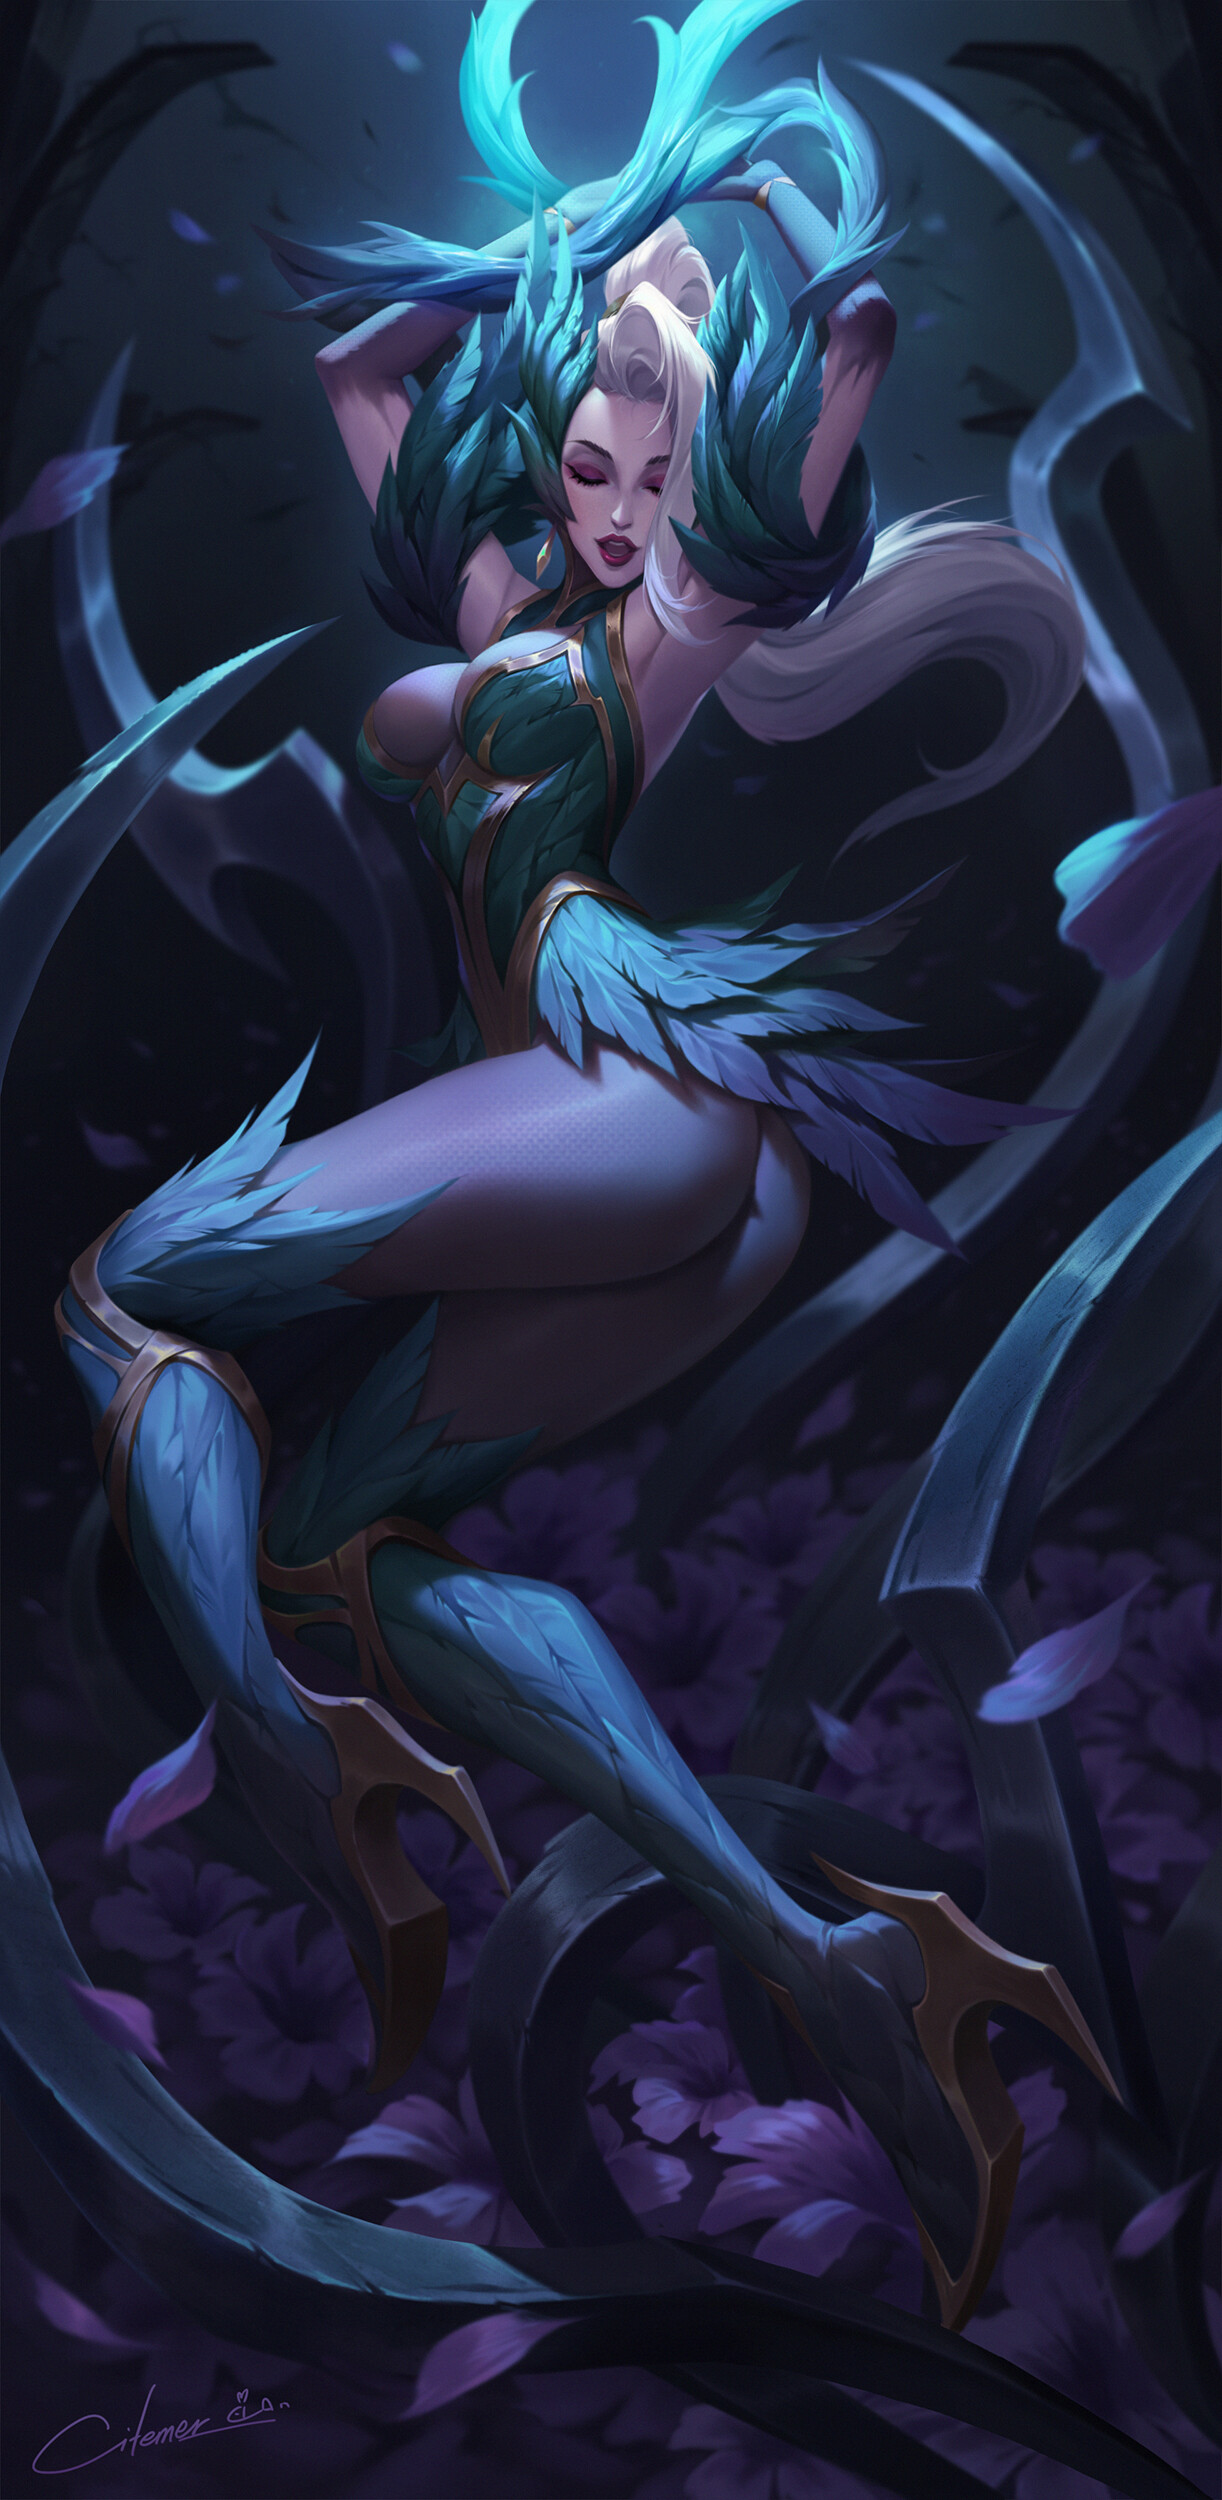 General 1222x2500 Citemer Liu drawing women Zyra (League of Legends) League of Legends thorns cleavage dress green clothing feathers blue high heels leaves digital art